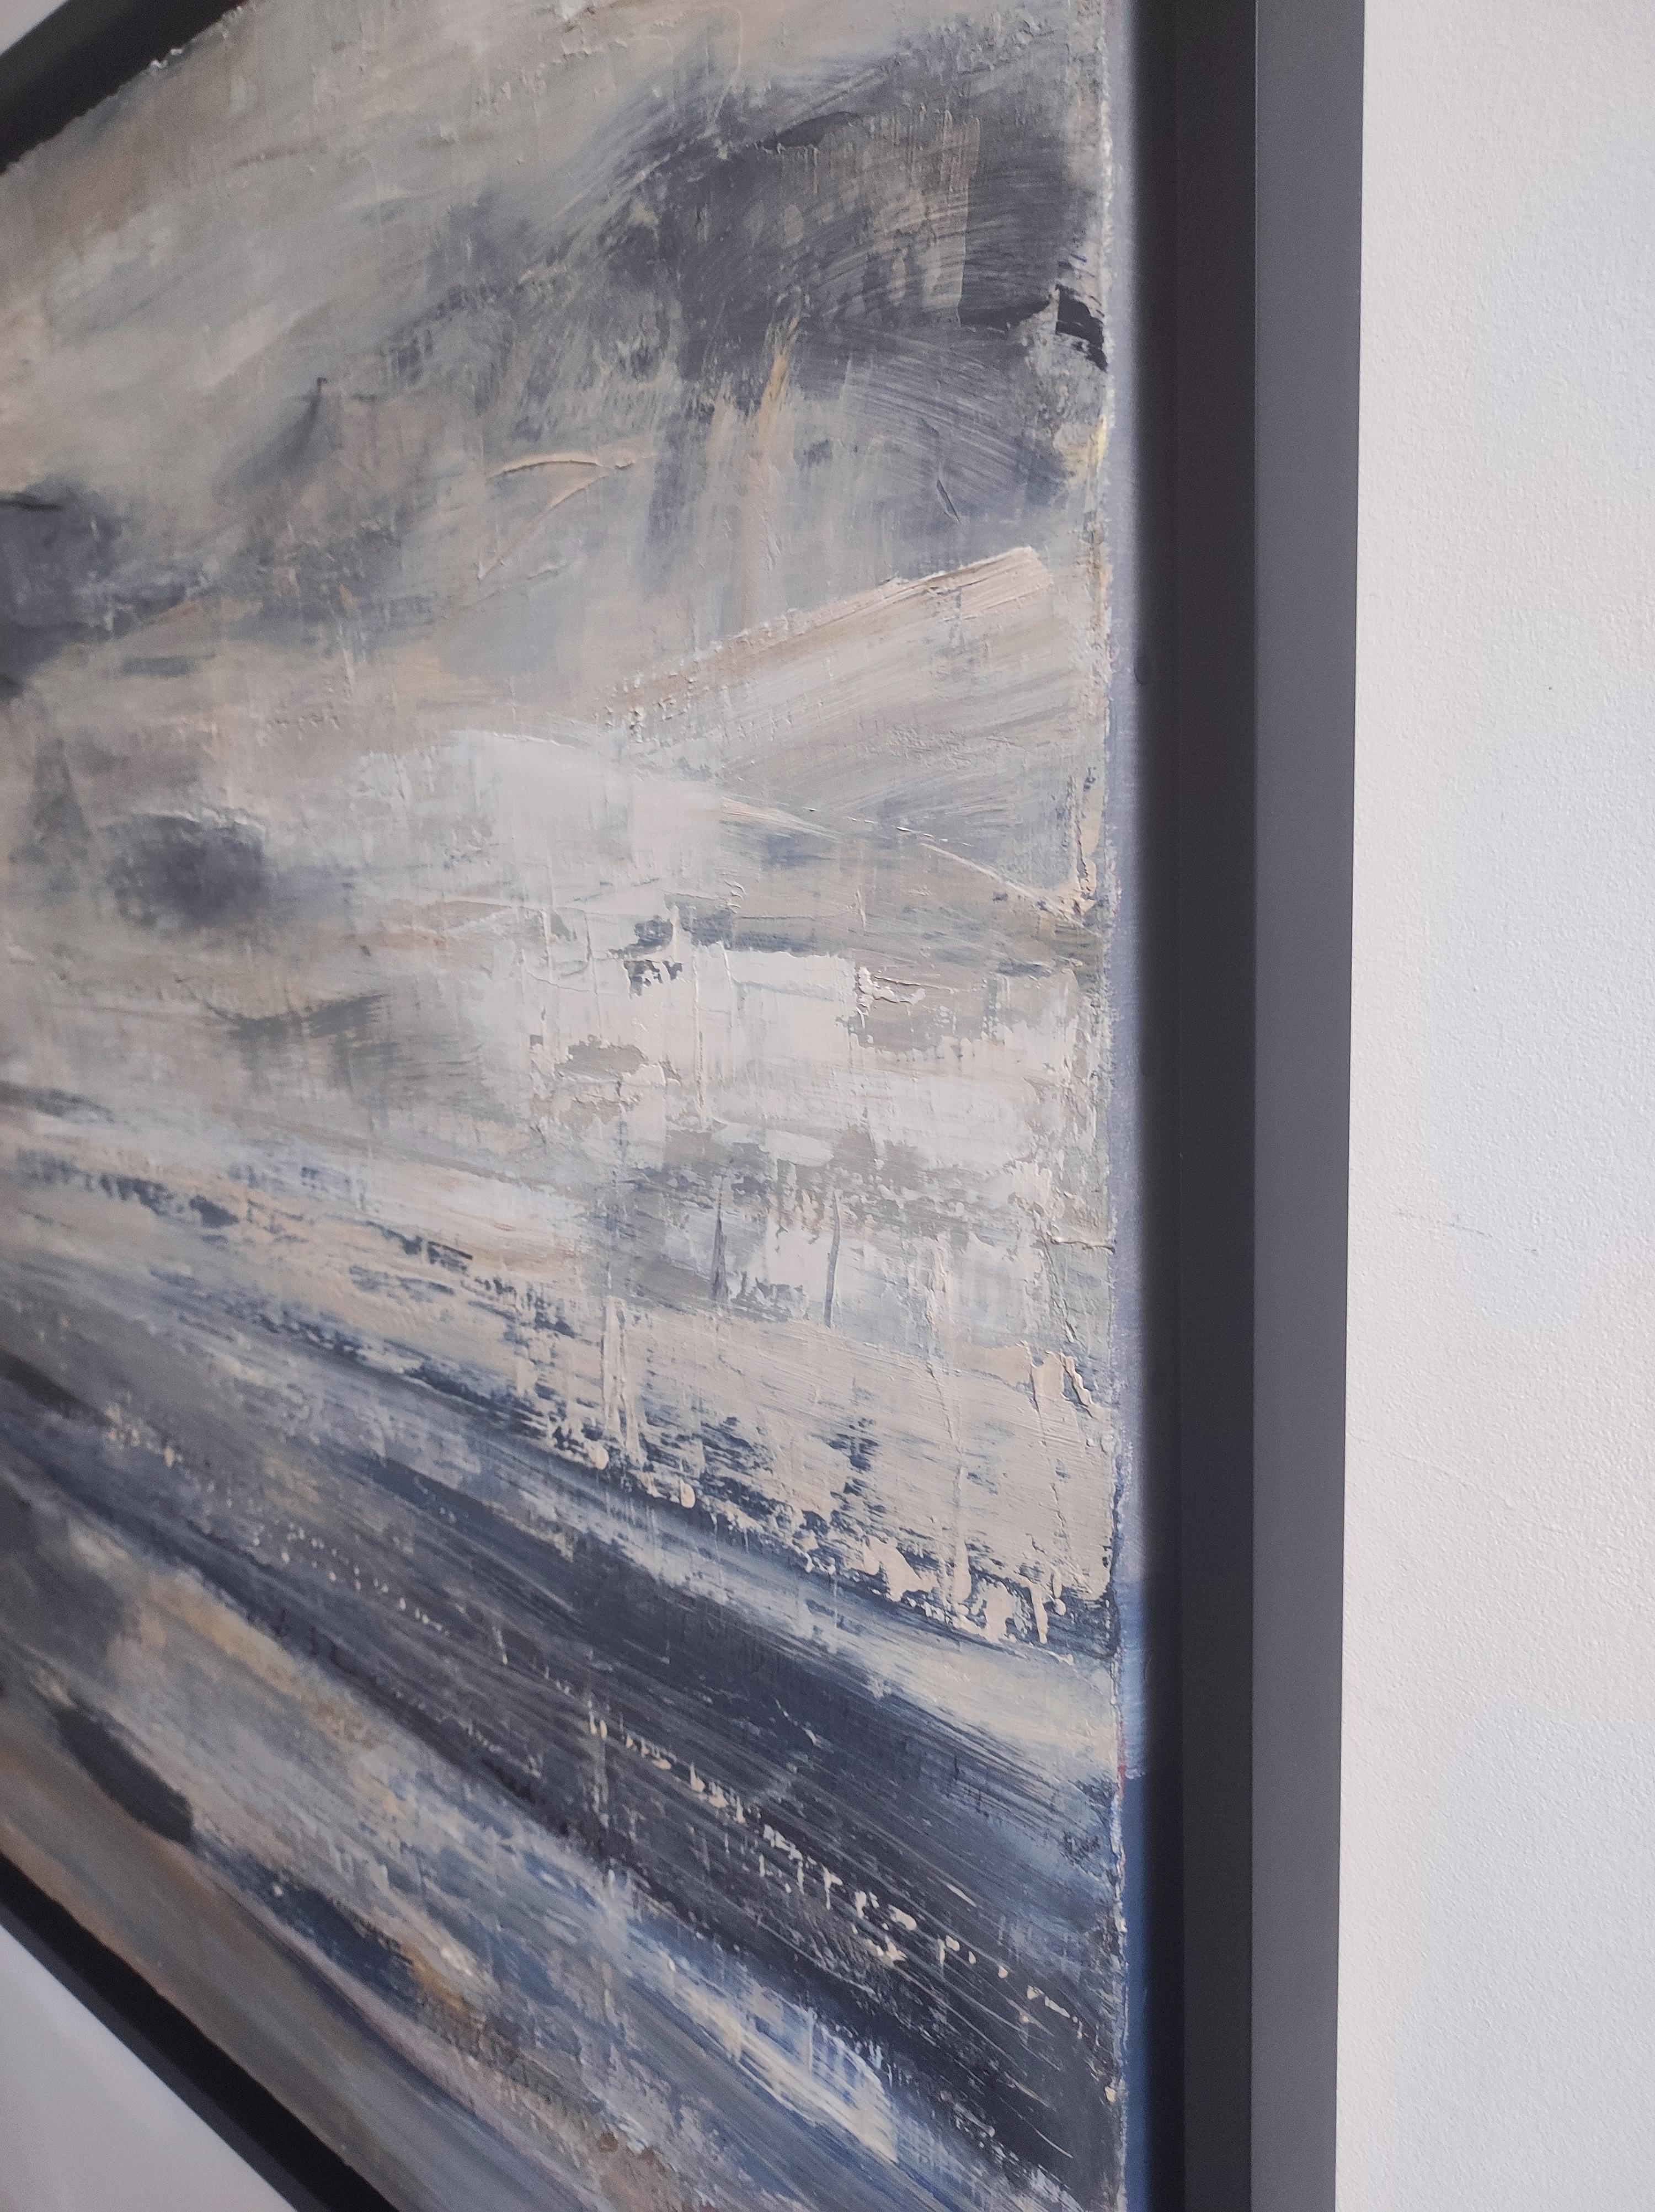 This captivating artwork transports us to an abstract vision of the coast, passionately crafted by the artist using oil on linen canvas. It's a seascape, caught between sky and sea, worked with a palette knife to bring exceptional depth and